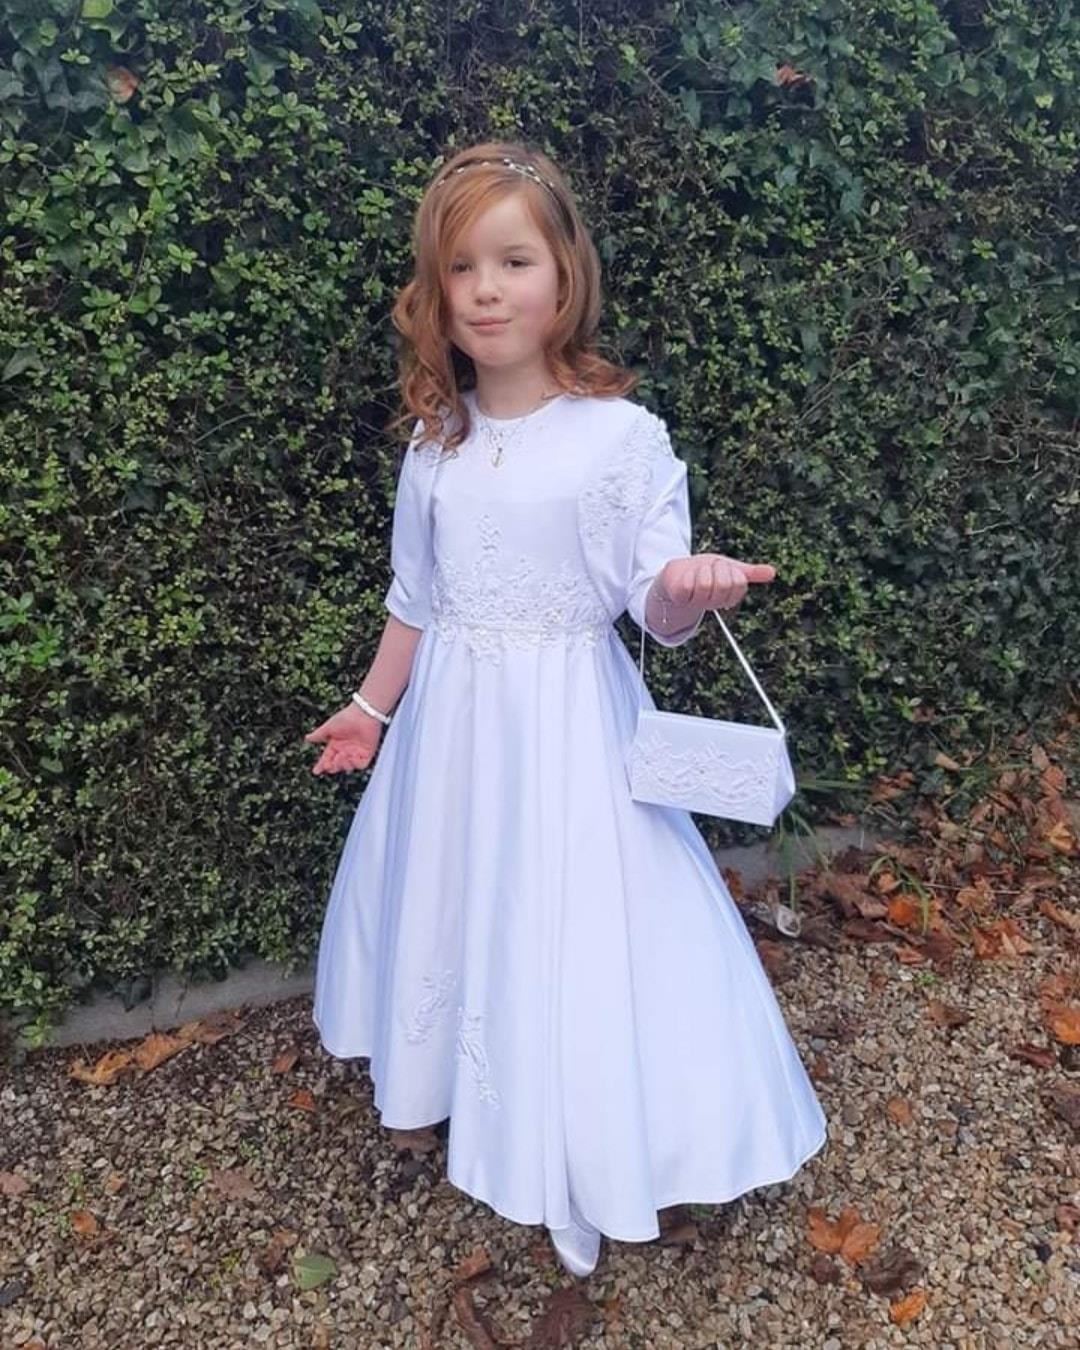 girl in white dress with her bag